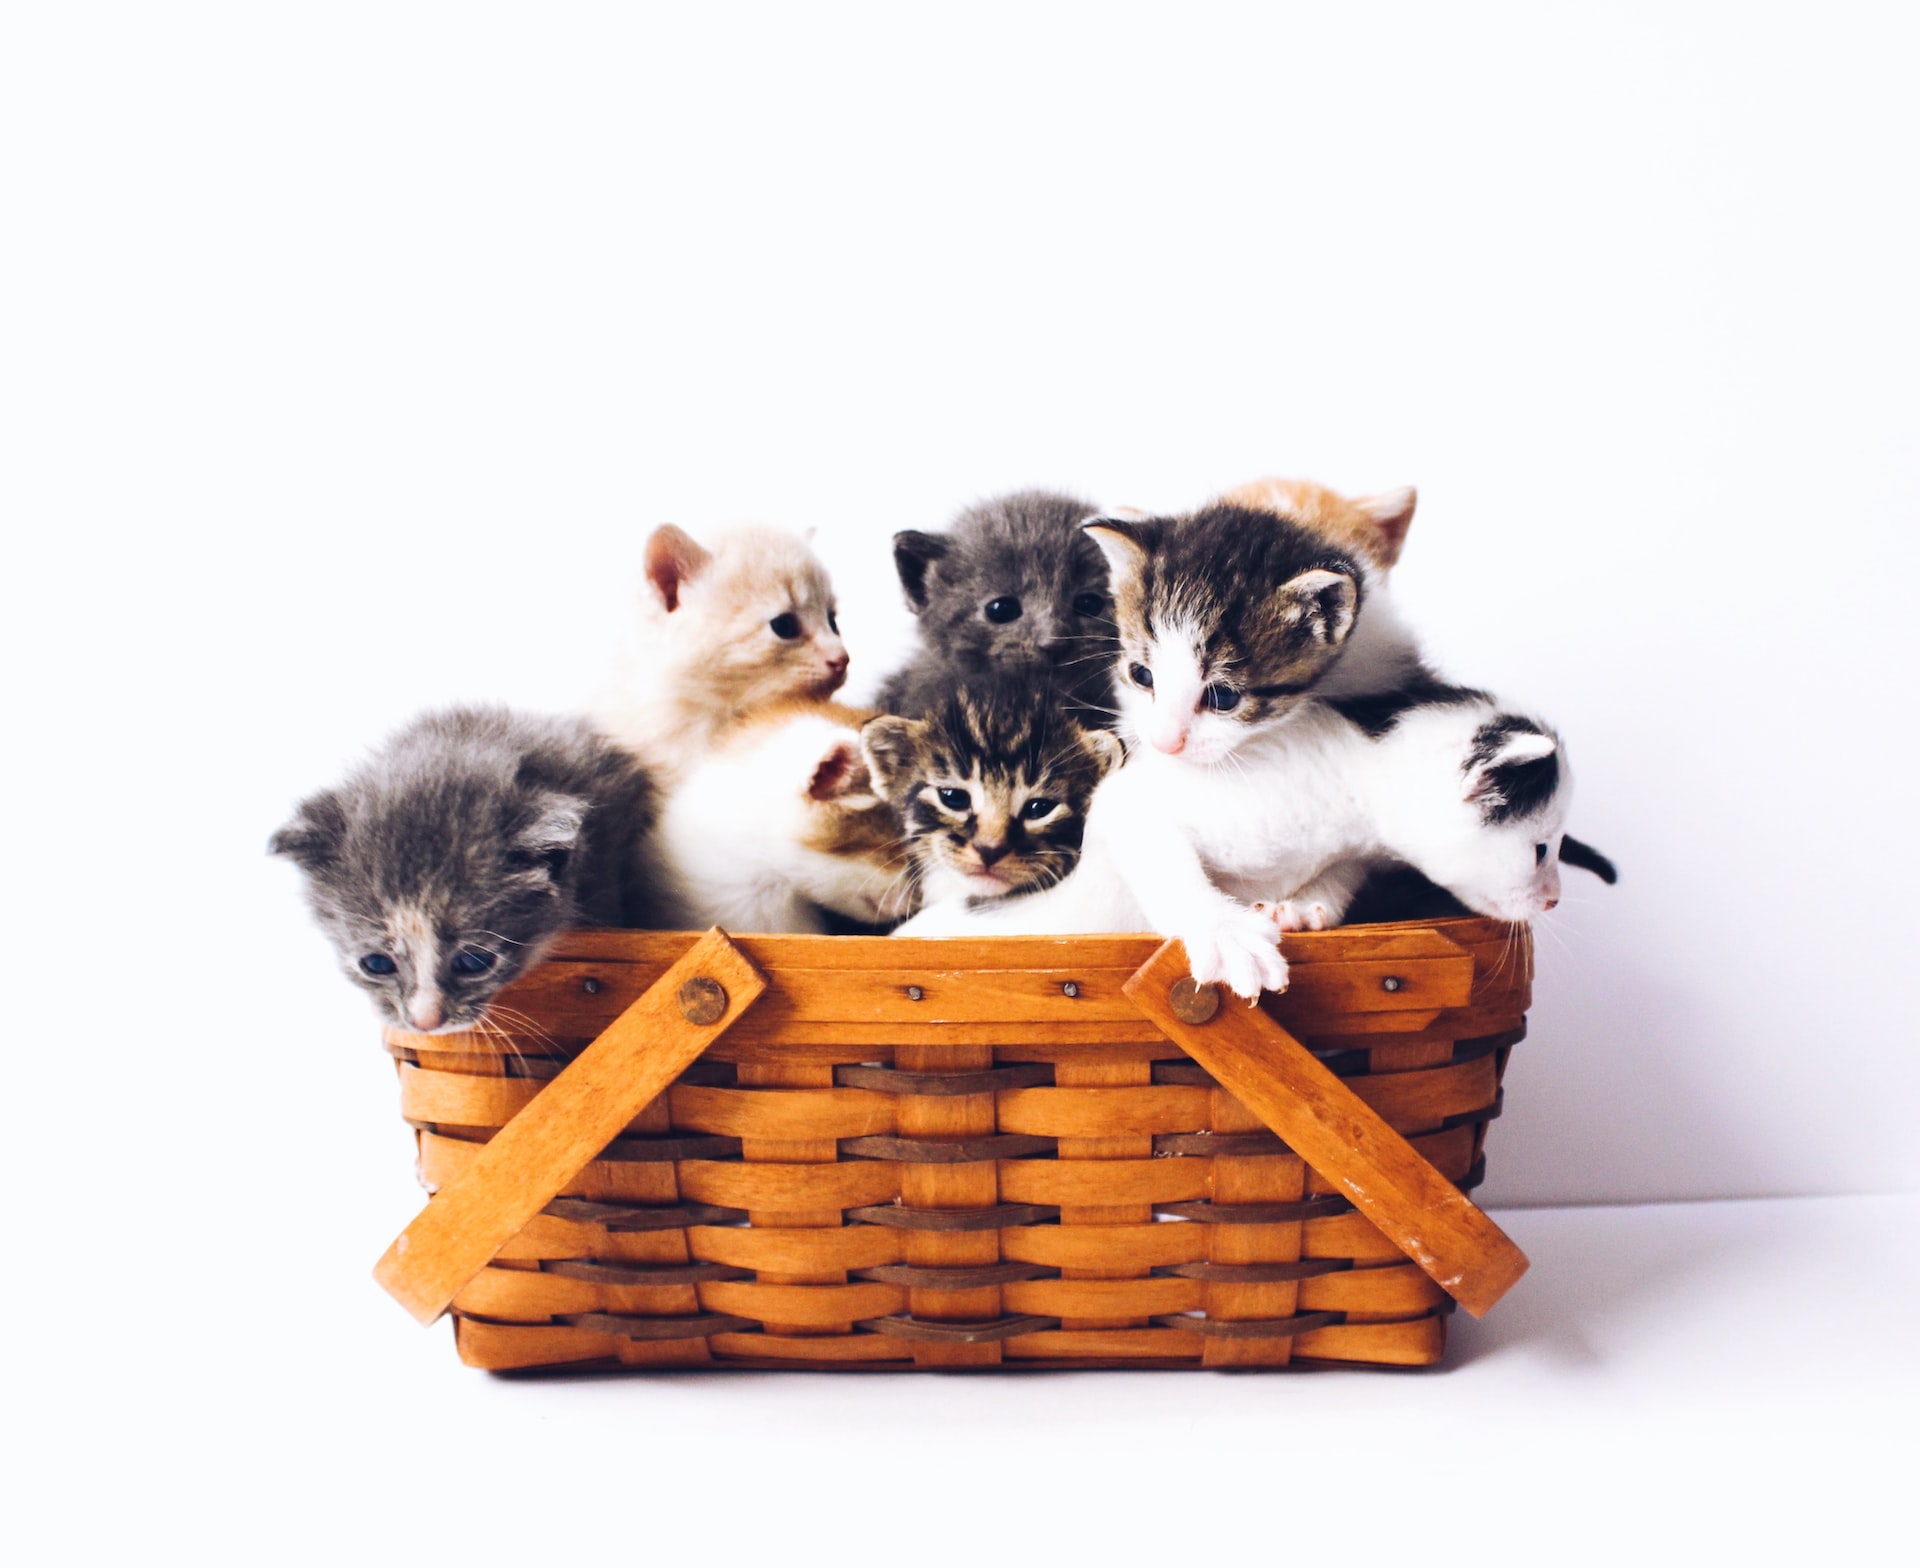 The Top 10 Fun Facts About Cats: From Whiskers to Purring